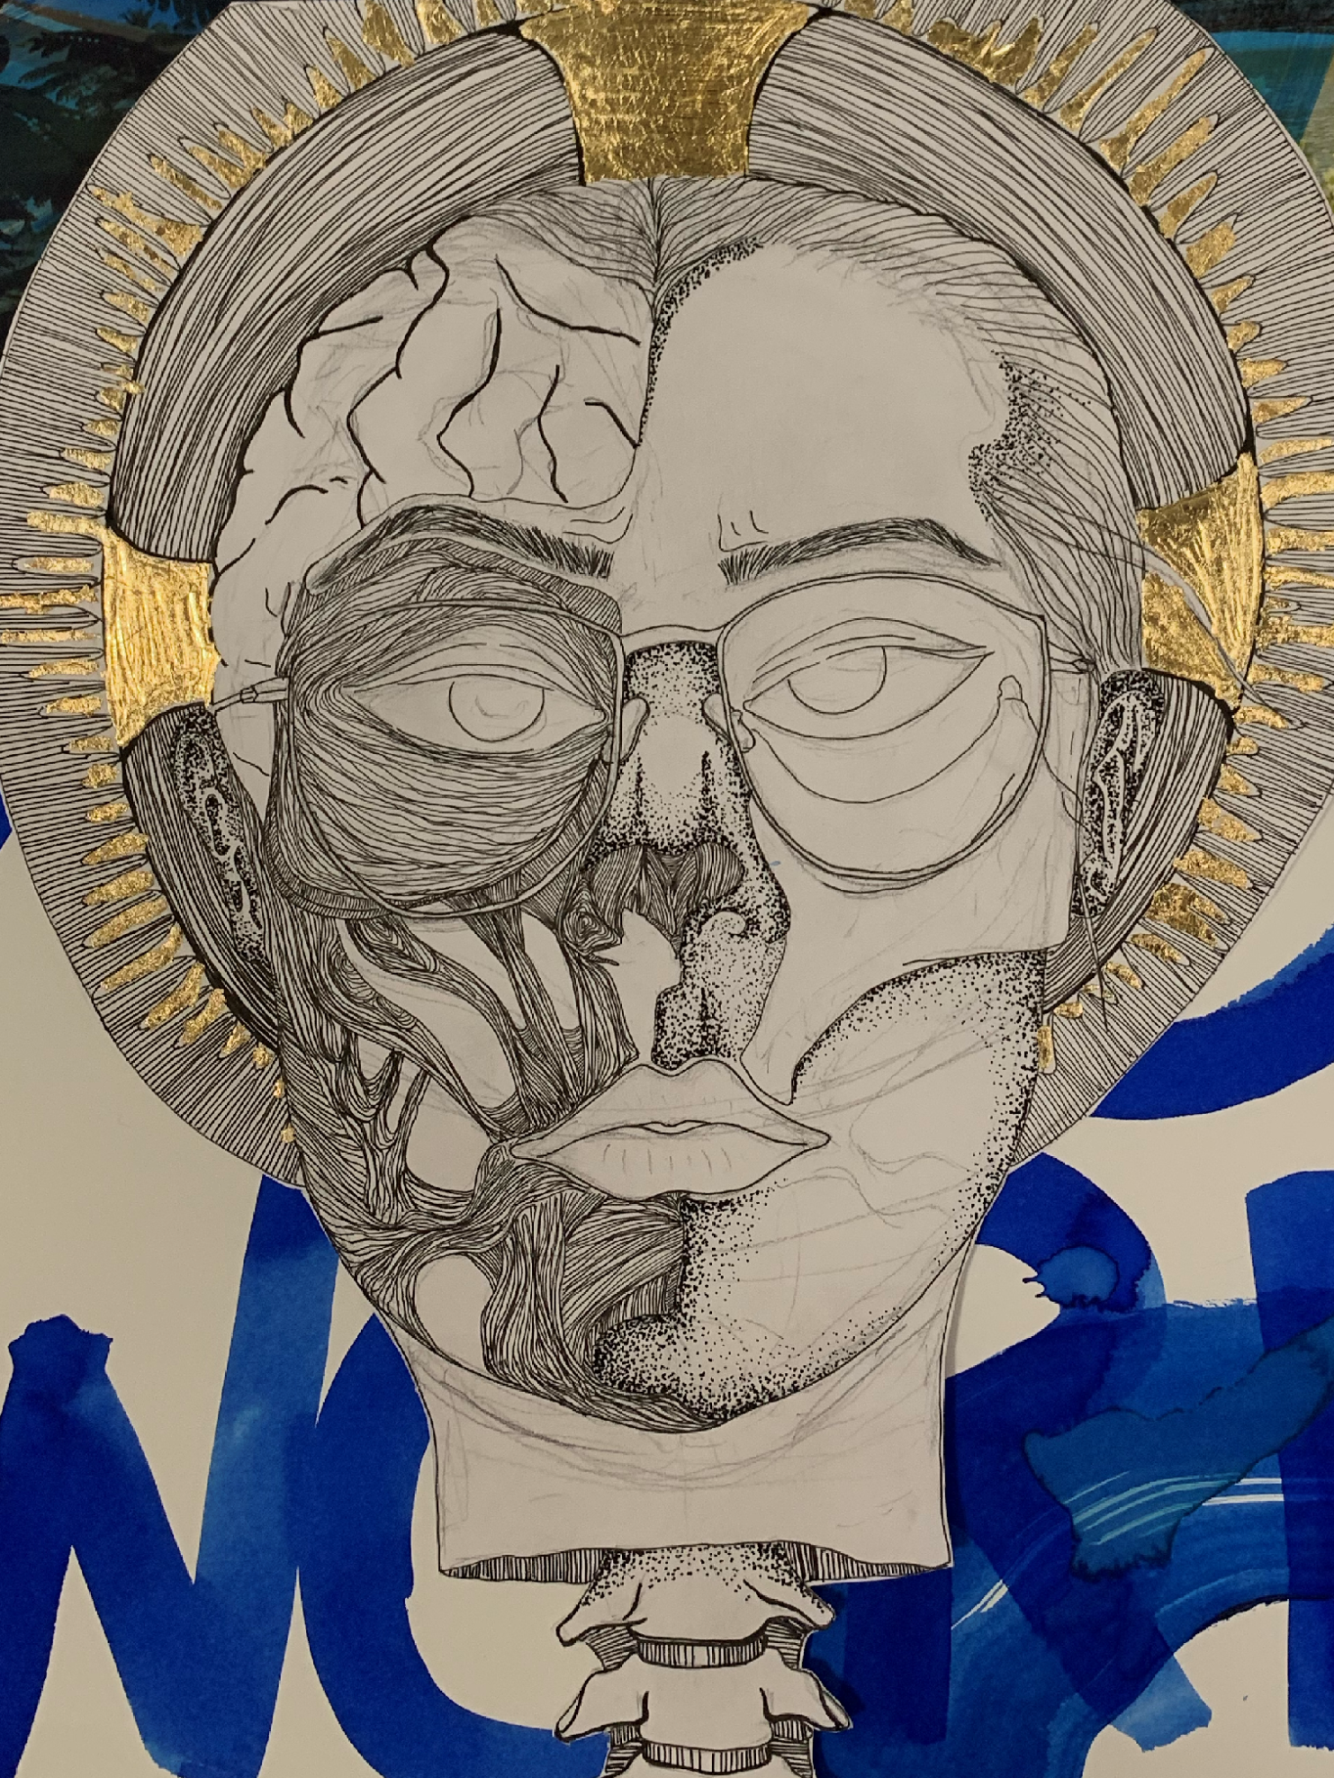 Drawing of a human head wearing glasses, showing some anatomical details of what is under the skin, including the brain, the face muscles and the spine under the neck. The head is surrounded by a circle with golden decorations, suggesting it is an aureola